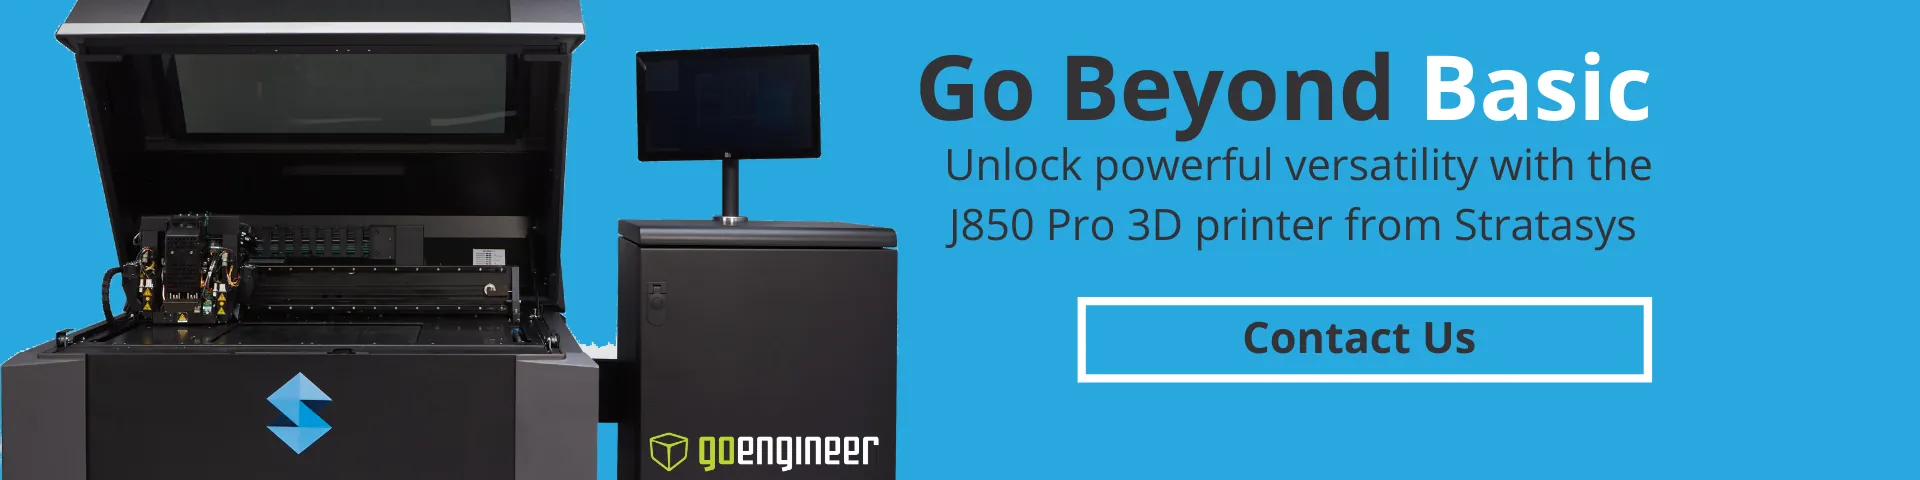 Contact GoEngineer About the Stratasys J850 Pro 